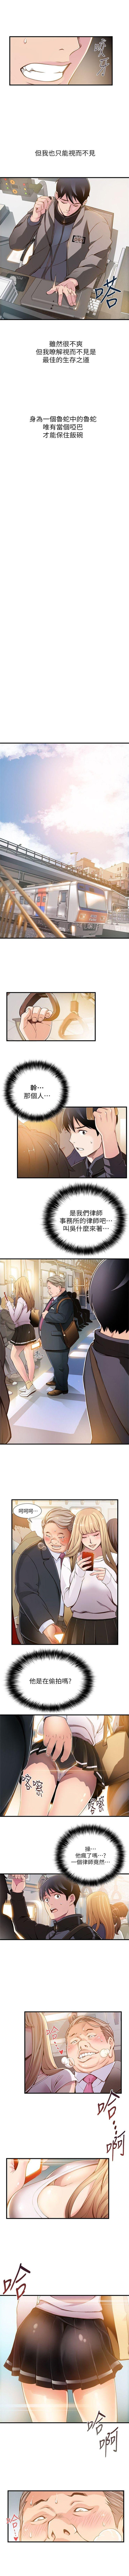 Thot 弱點 1-94 官方中文（連載中） Uncensored - Page 7